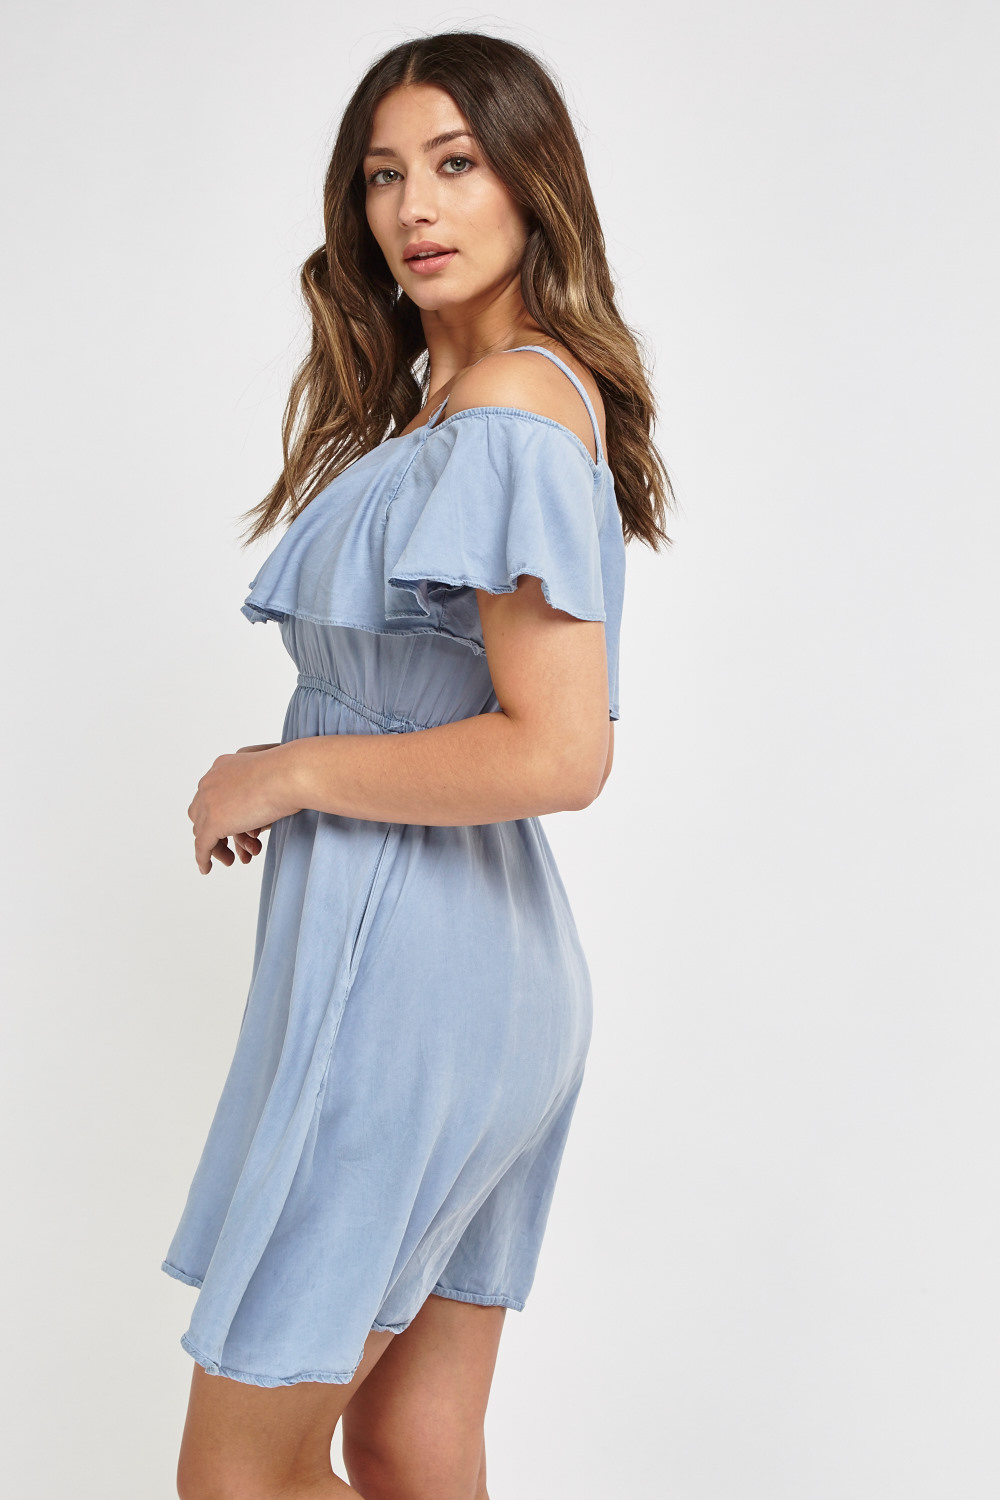 Twin Straps With Ruffle Overlay Off Shoulder Dress - Just $7